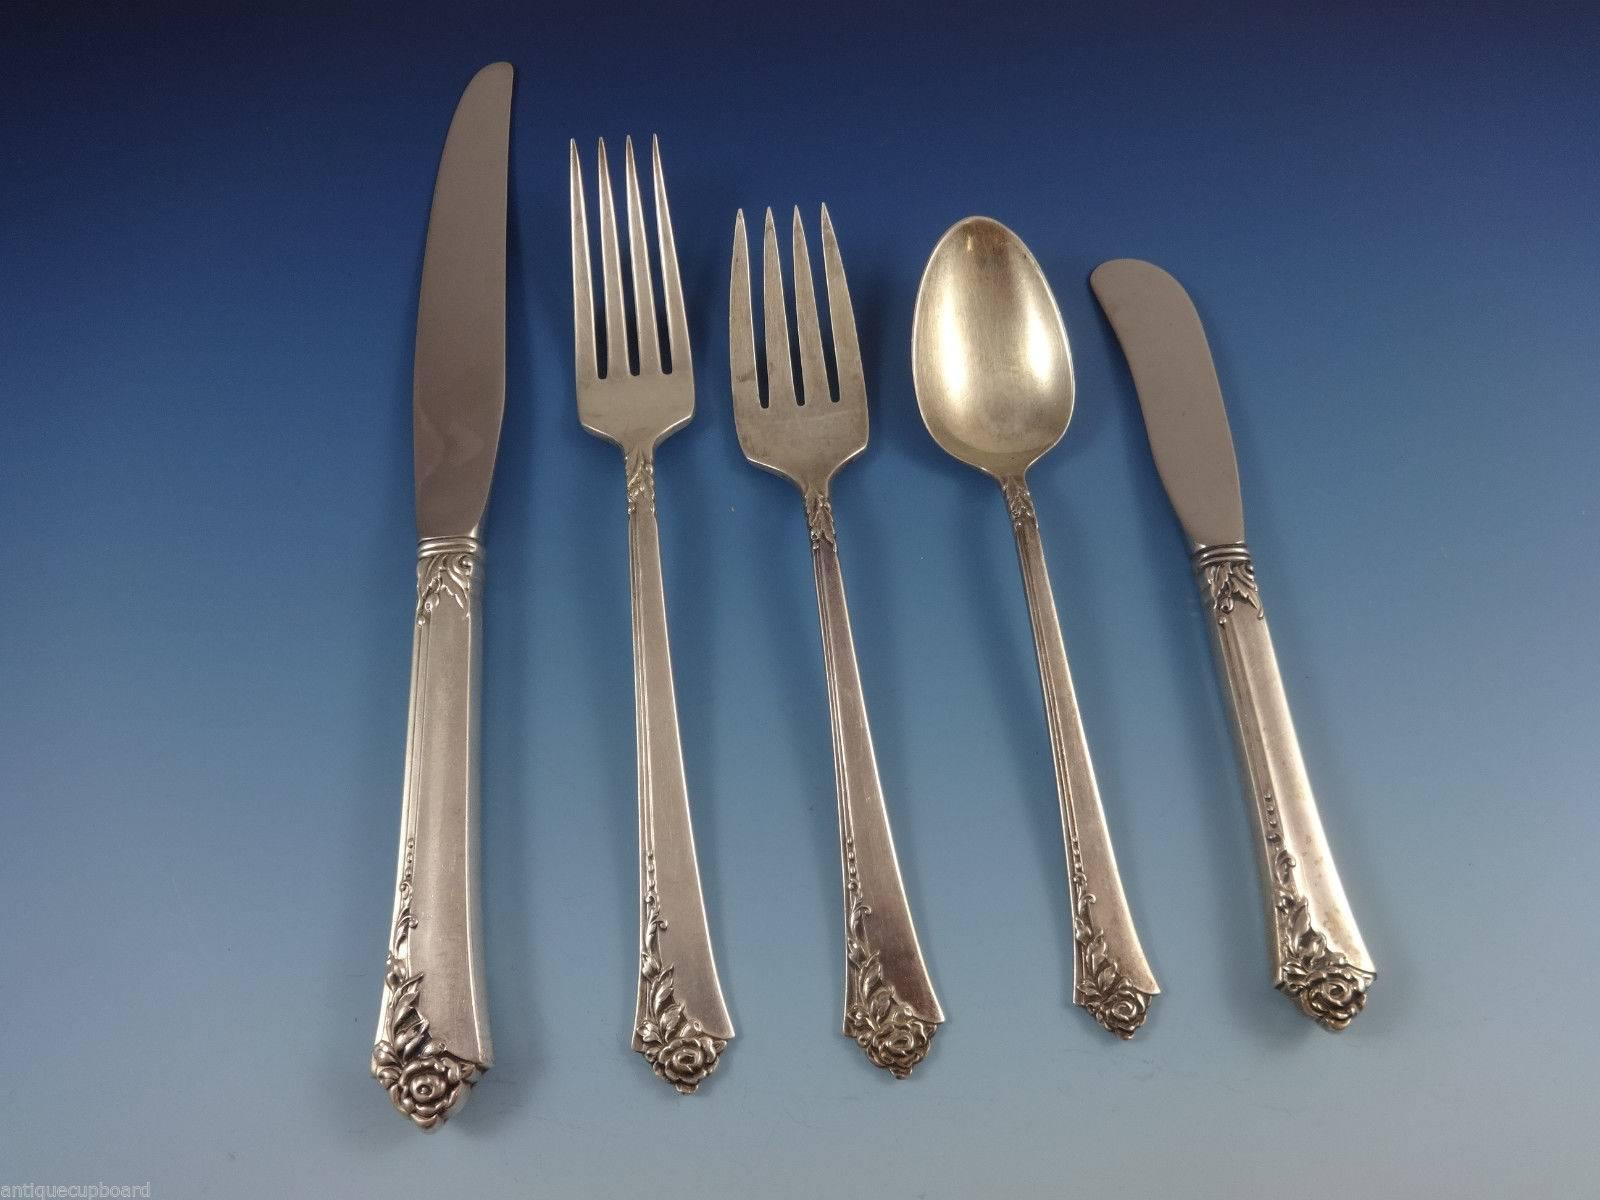 Damask Rose is a popular pattern that was released in the year 1946. The pattern has a three-dimensional rose motif with a modern twist.

Large Damask Rose by Oneida sterling silver flatware set of 69 piece set. This set includes:

12 knives, 8